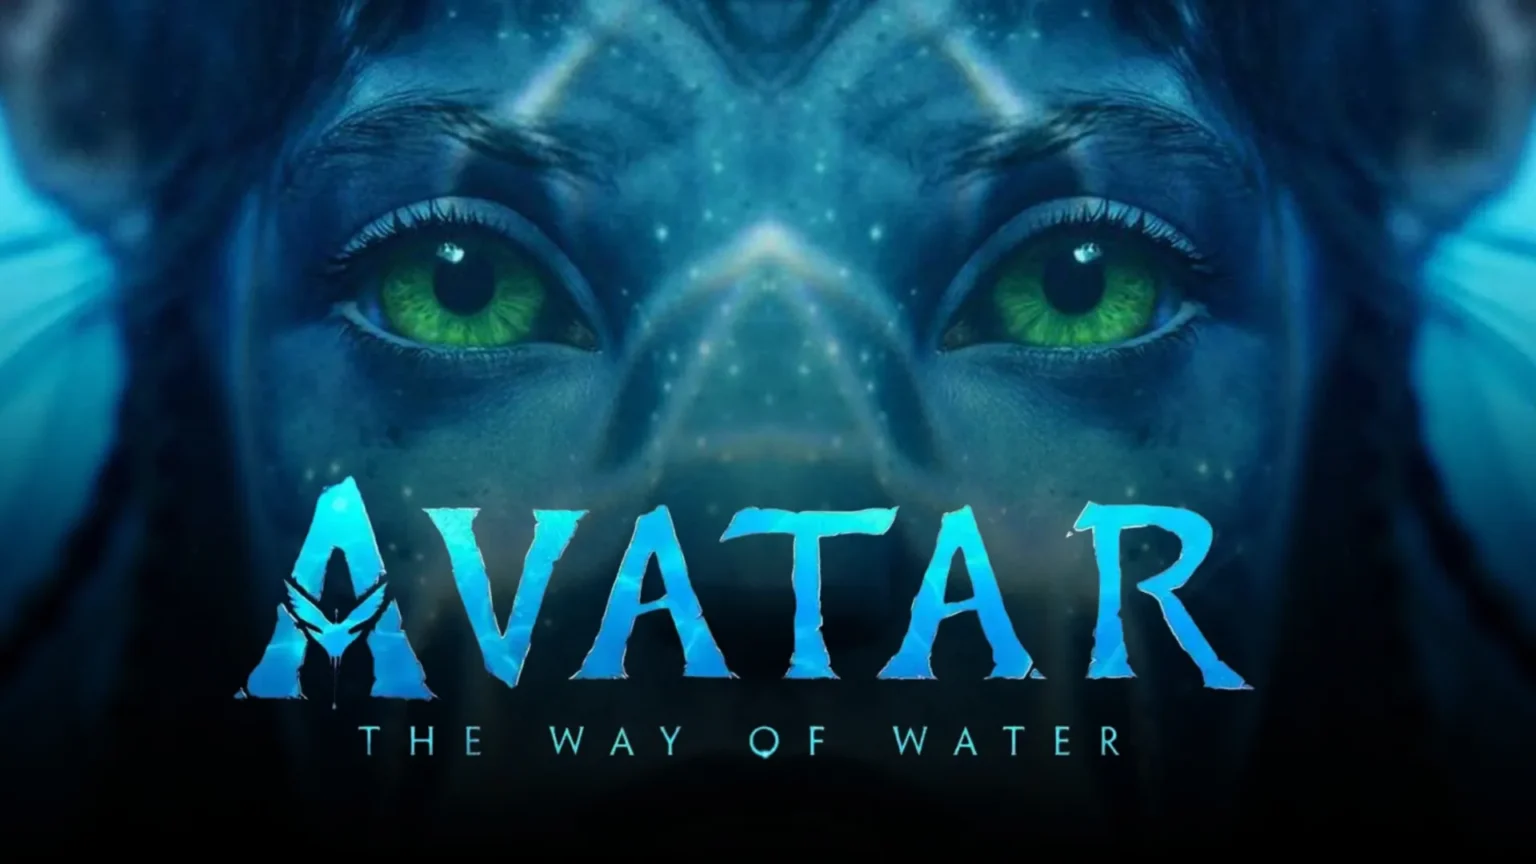 Why is Avatar: The Way of Water creating a sensation all over the world?